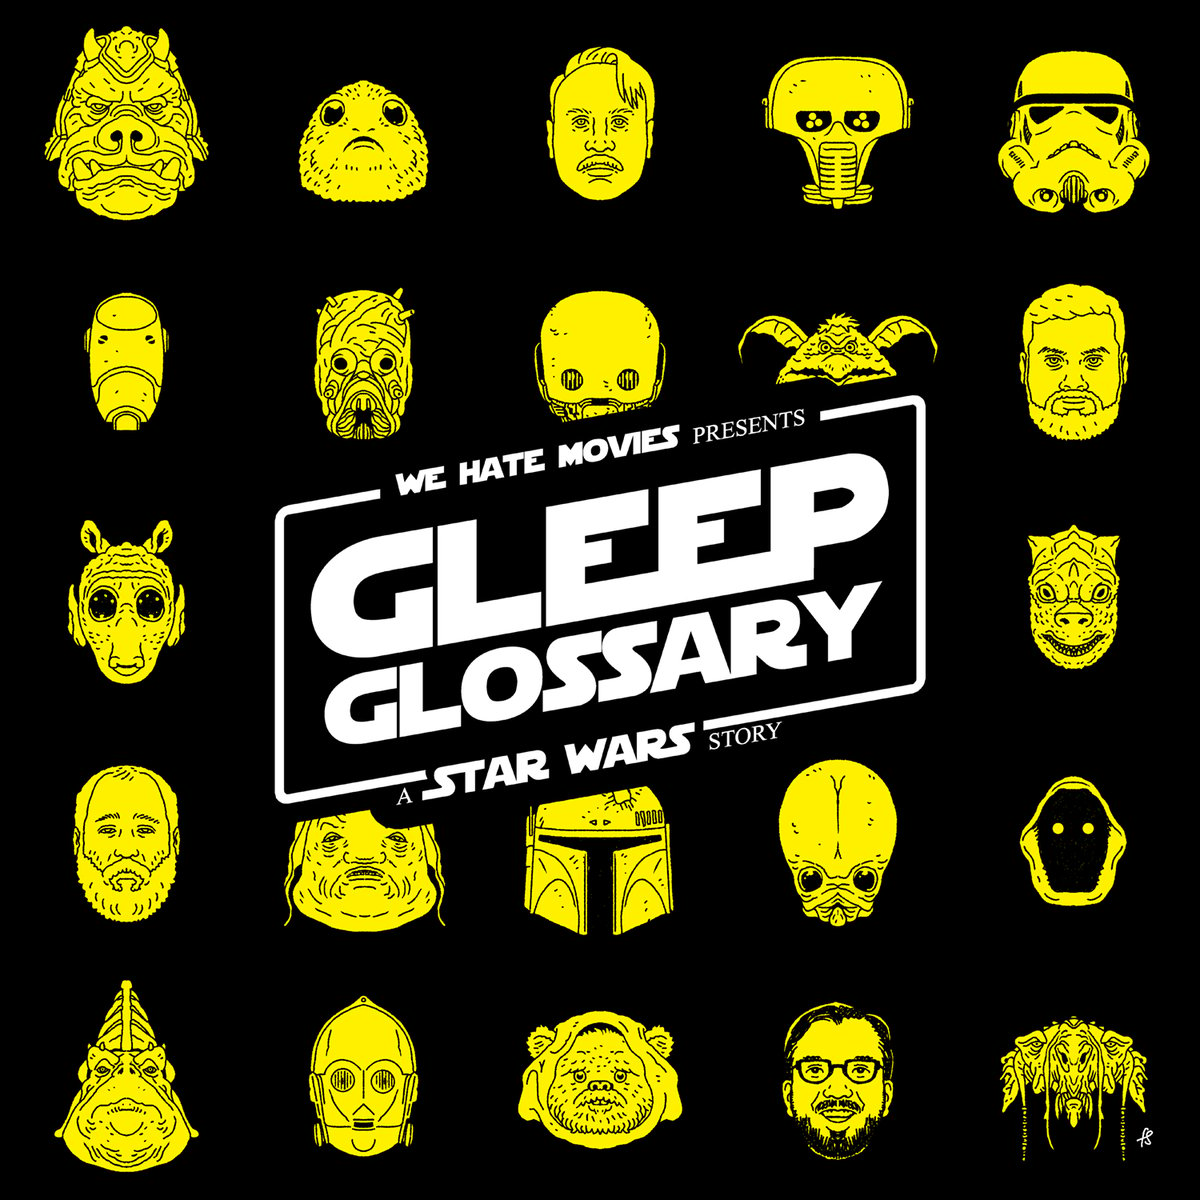 WHM's Gleep Glossary: A Star Wars podcast cover art: Neon yellow drawings of the facs of various characters from Star Wars on a black background.